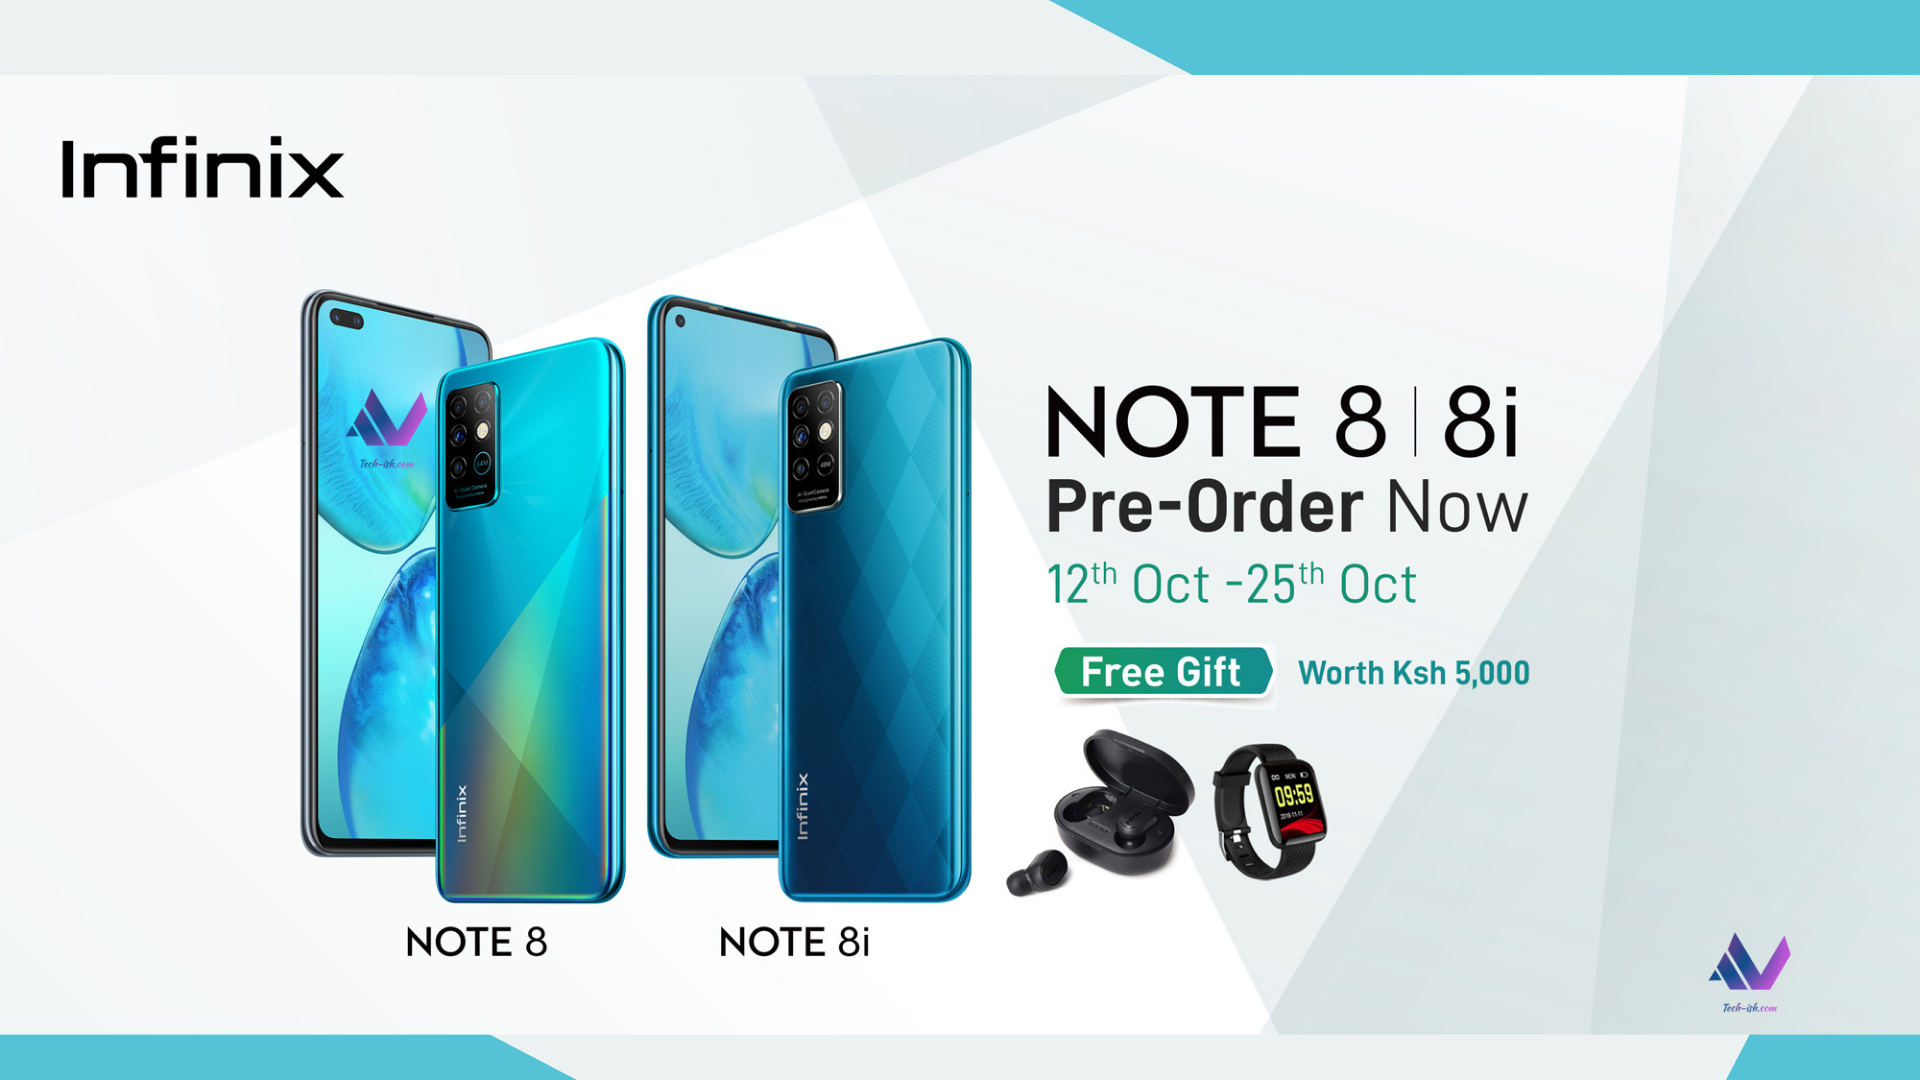 The upcoming Infinix NOTE 8 series will seemingly be launching quite early. The company has announced pre-orders in Kenya will start on October 12th and run through to October 25th. Those preordering stand to win free gifts worth KES. 5,000 including wireless earbuds, and a smartwatch.